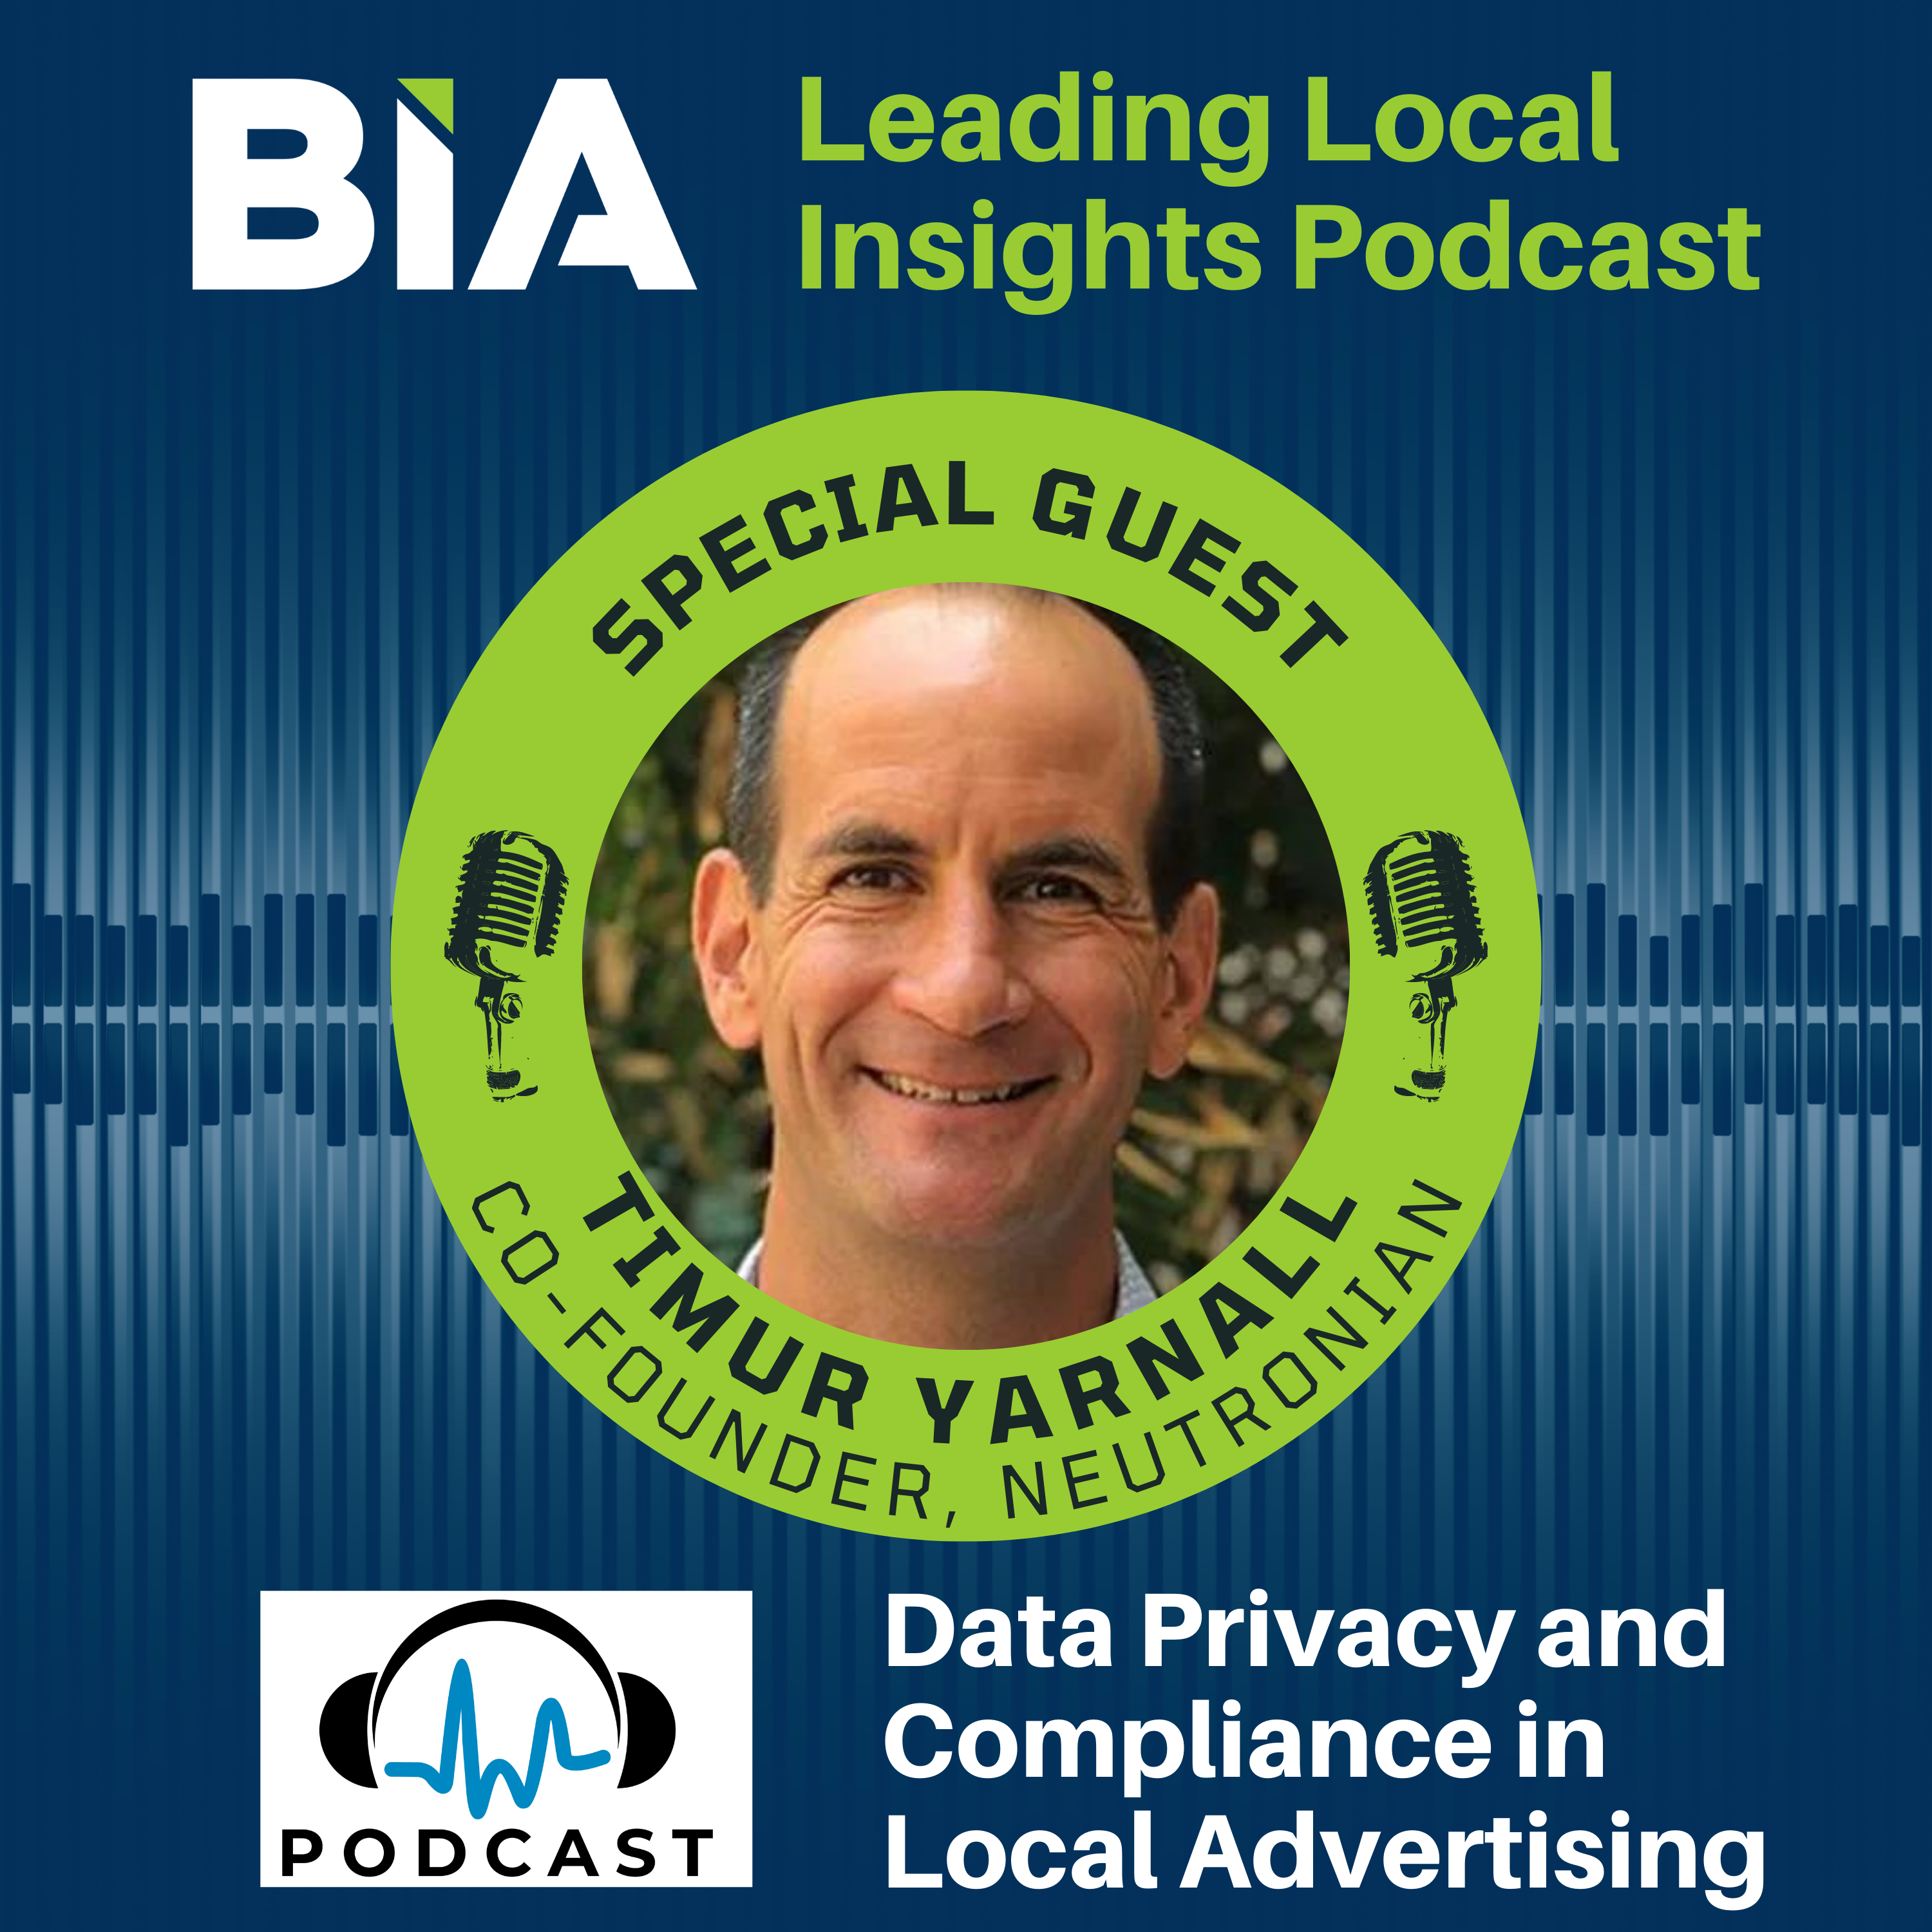 Data Privacy And Compliance In Local Advertising: Leading Local Insights Podcast